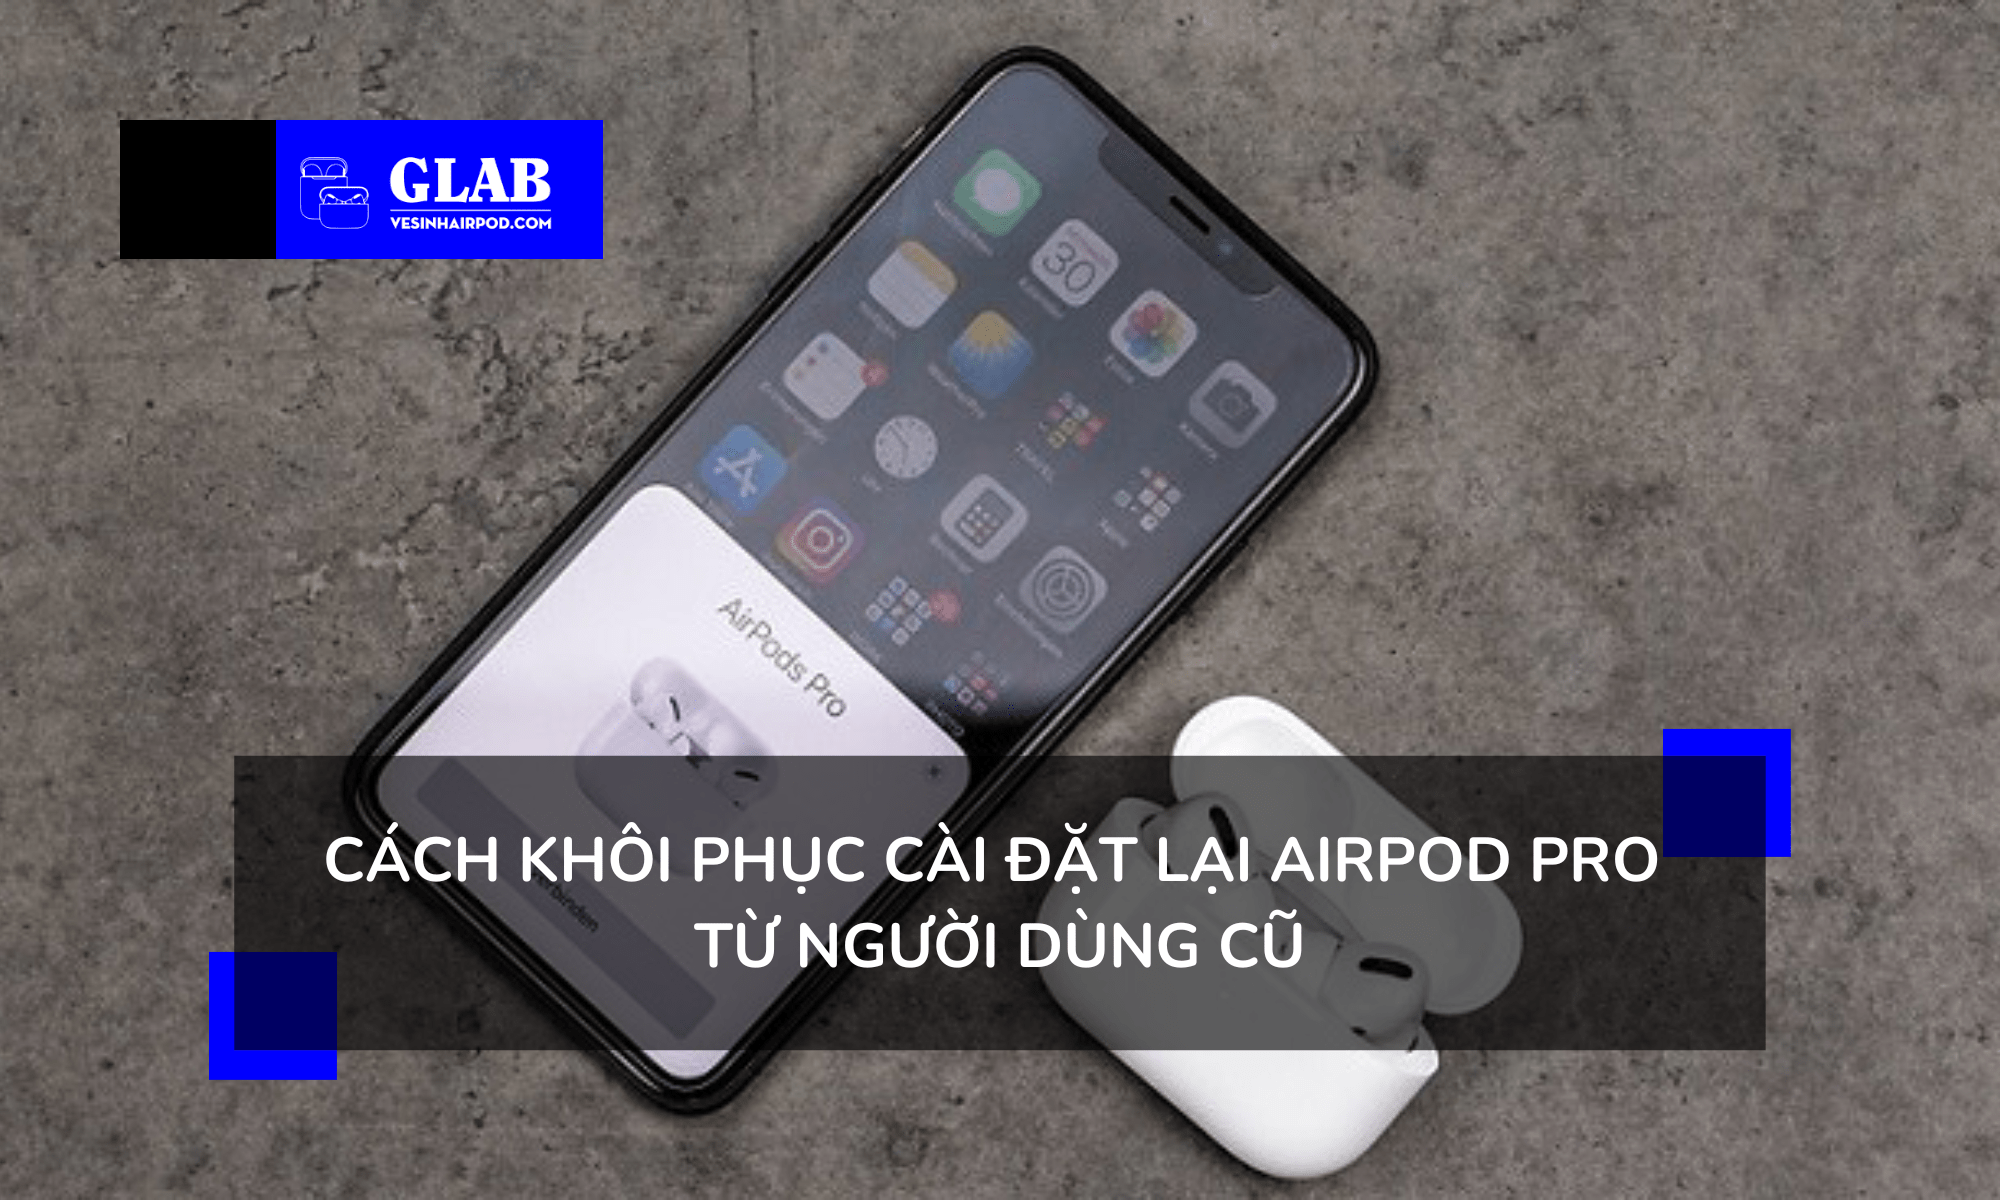 cach-dat-lai-airpod-pro